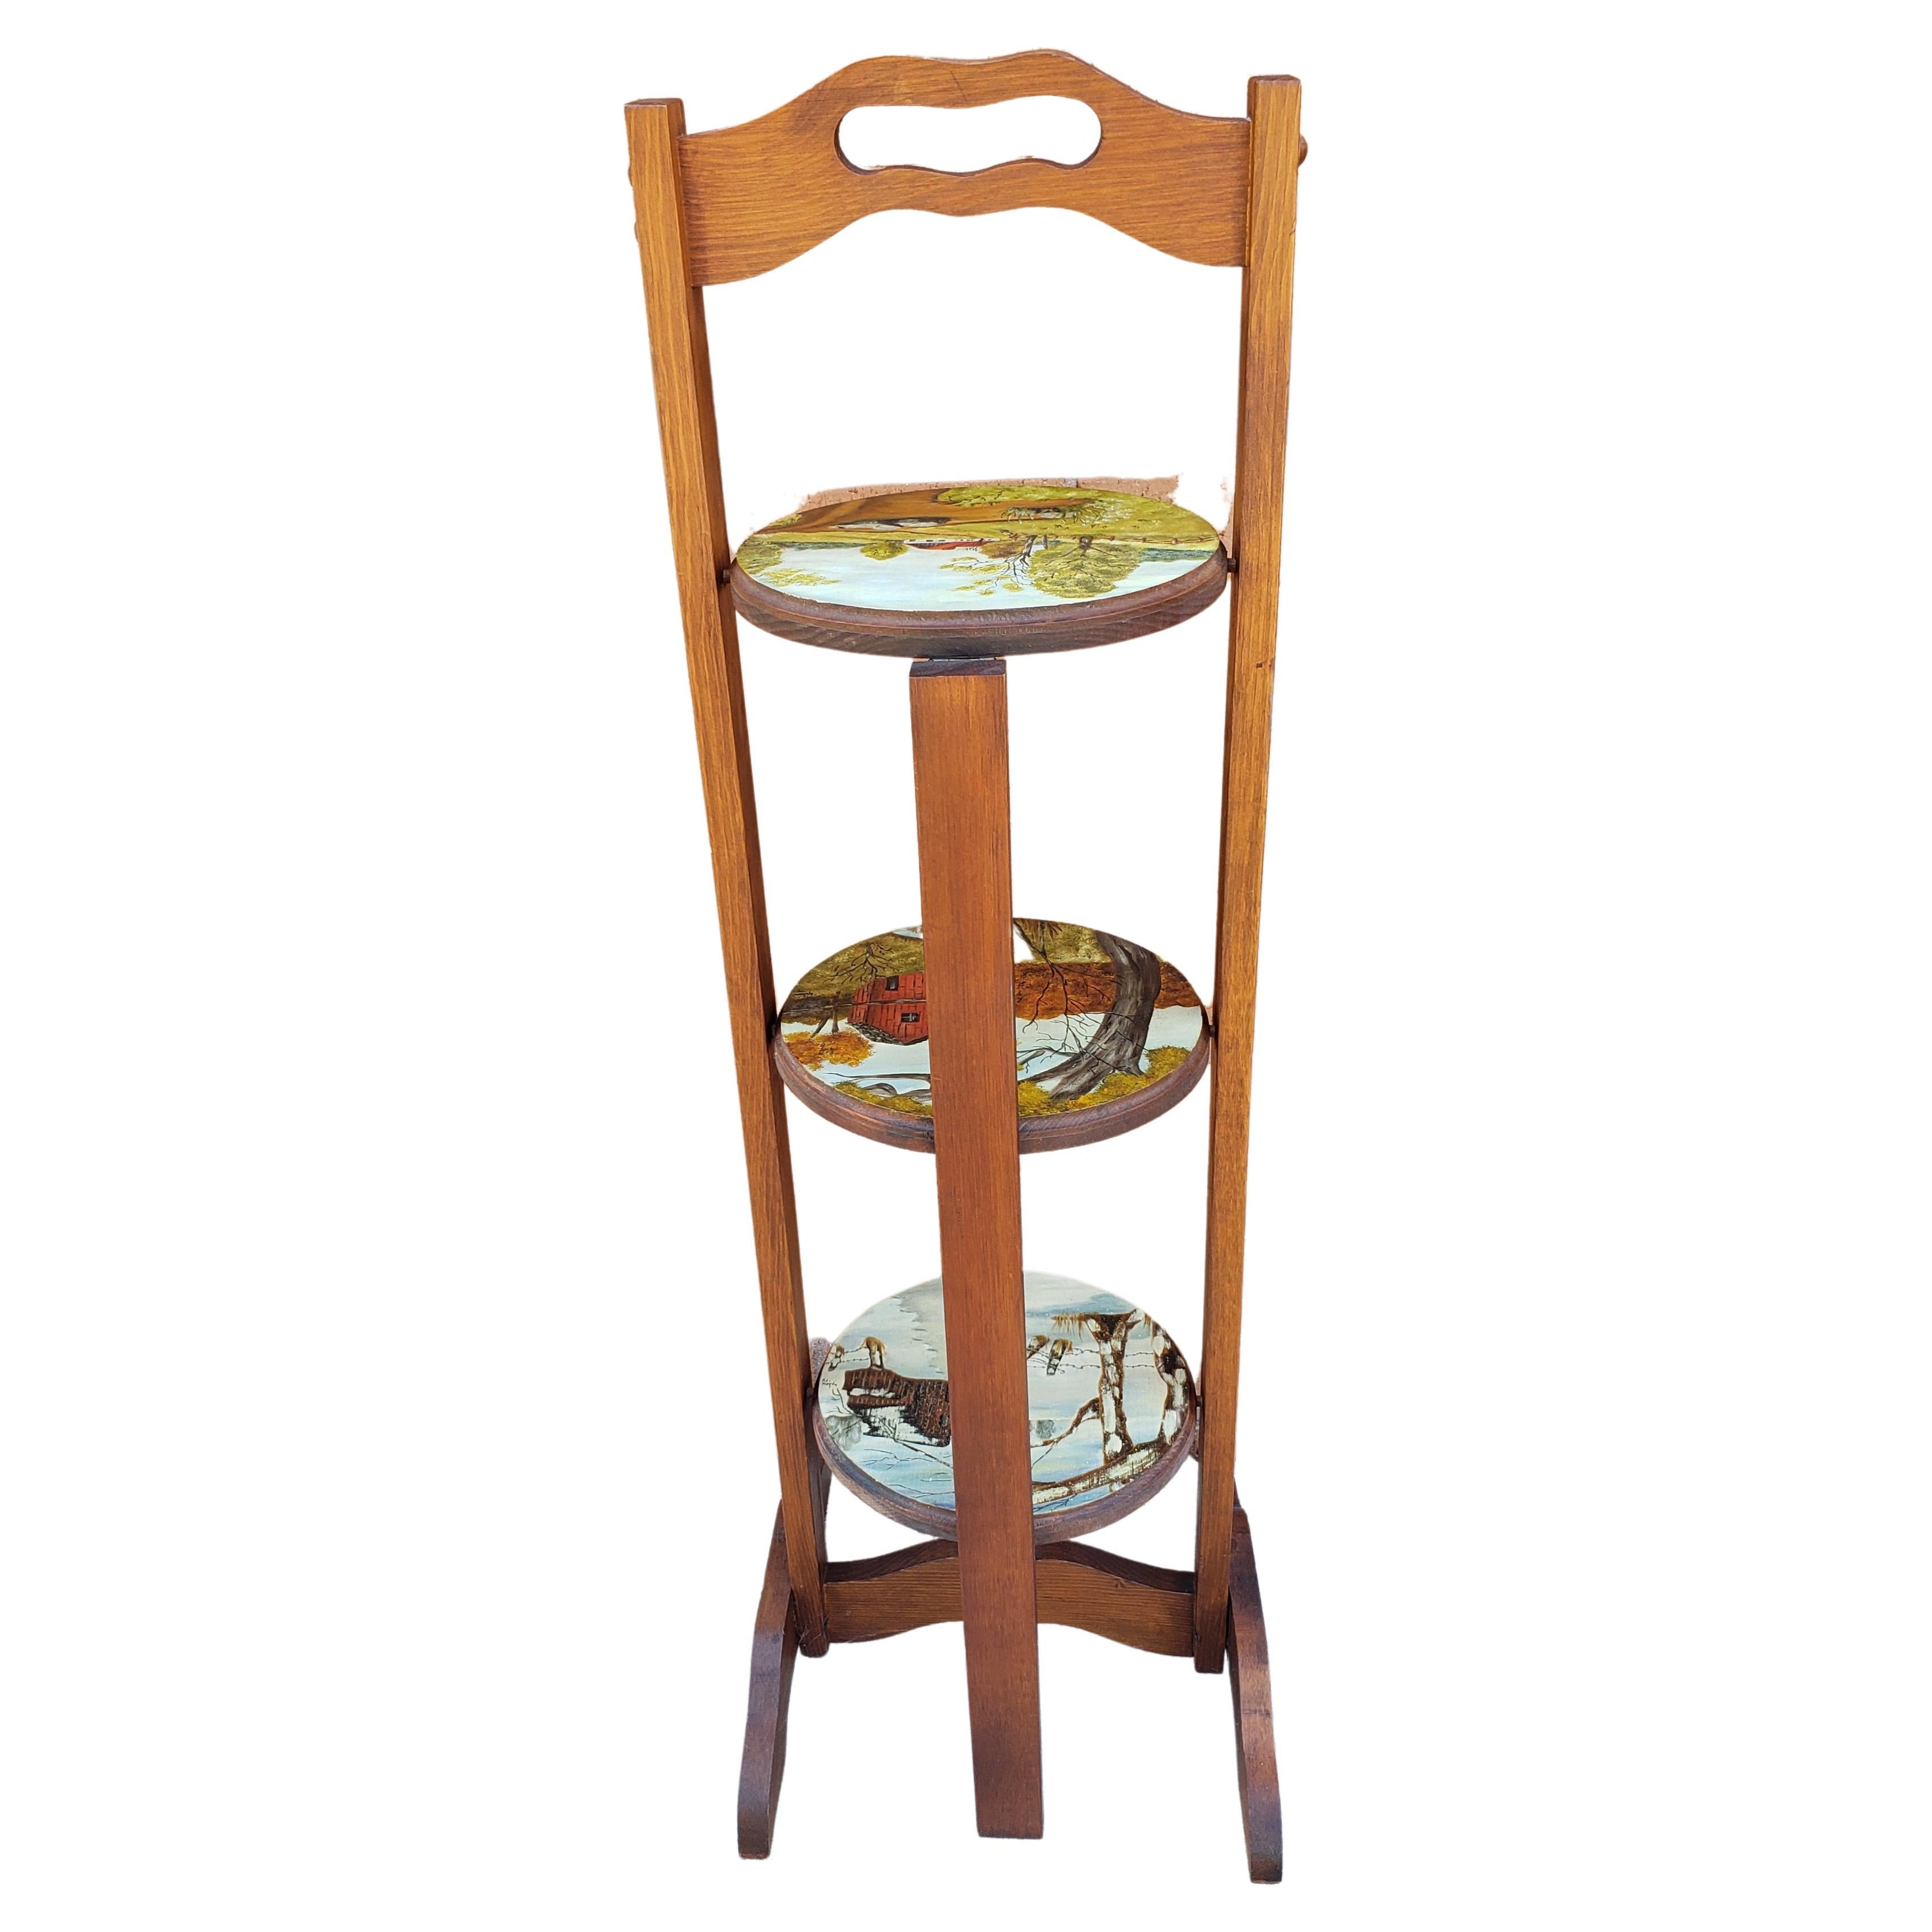 A beautiful three tier hand painted muffin stand. Measure 12.5